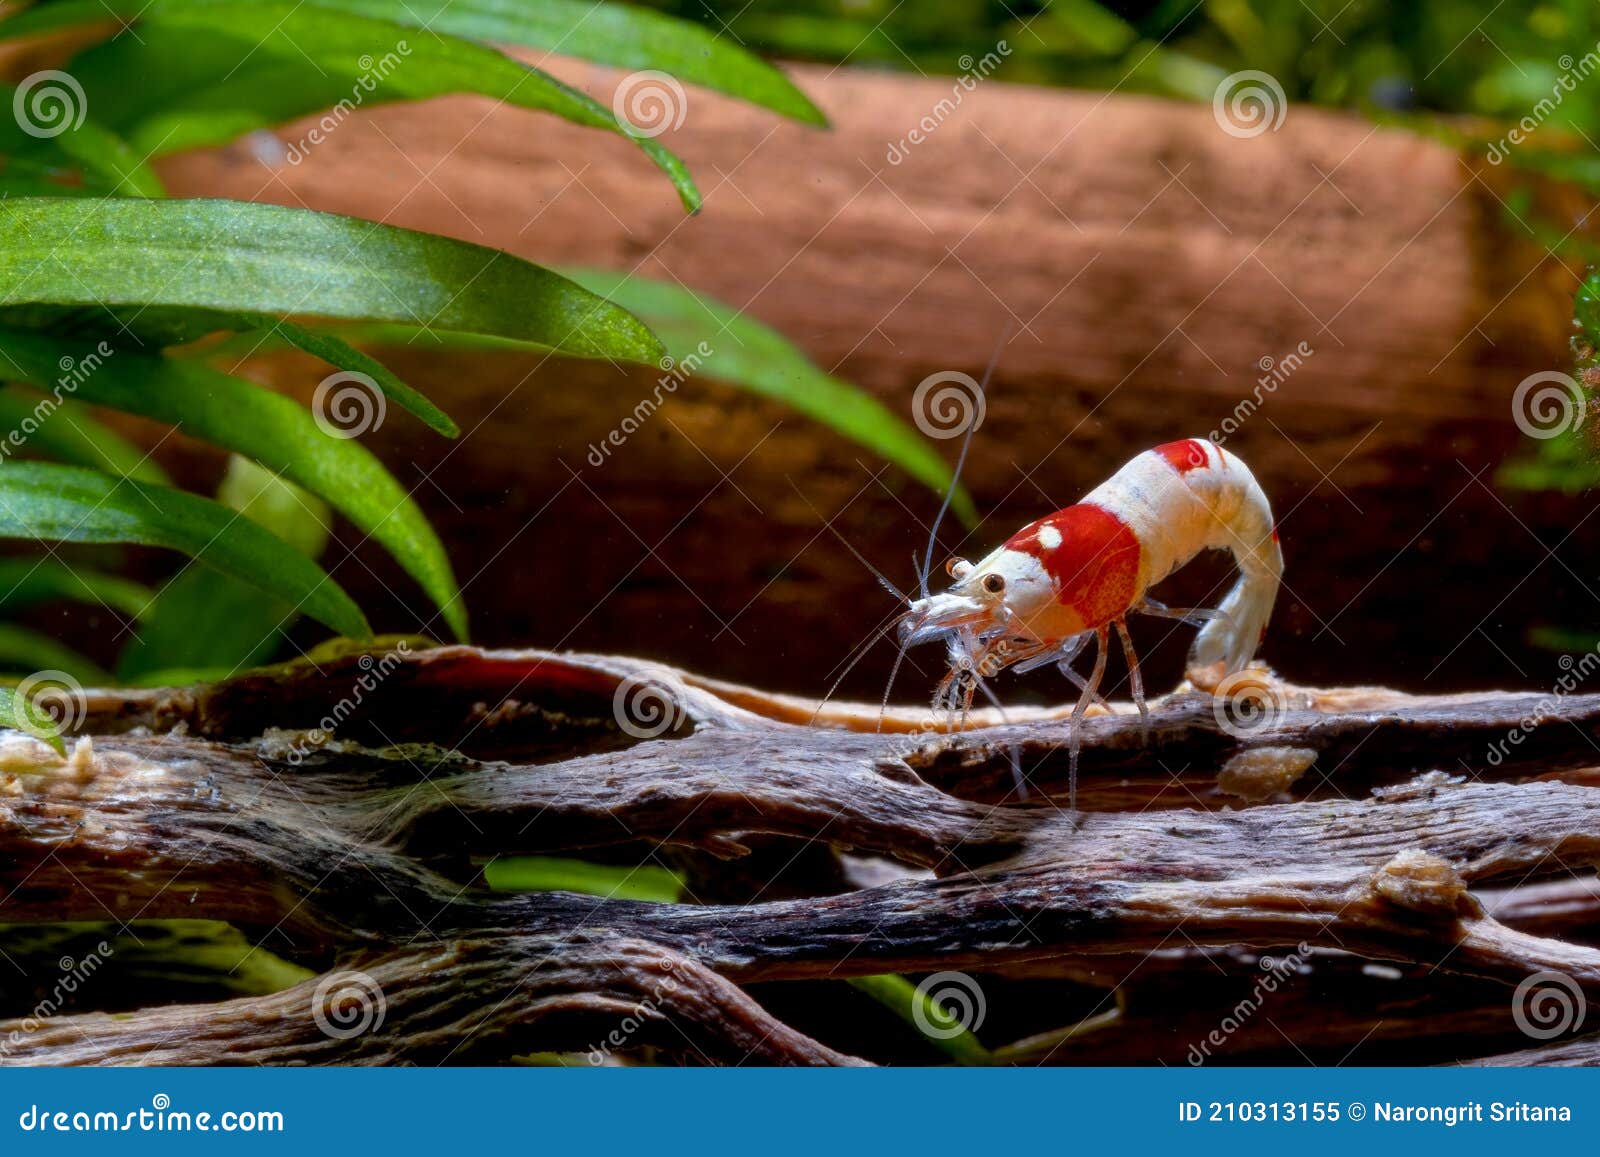 Small Red Bee Shrimp Bend Body and Stay on Timber Decorative in Fresh Water  Aquarium Tank Stock Image - Image of decorative, aquascape: 210313155